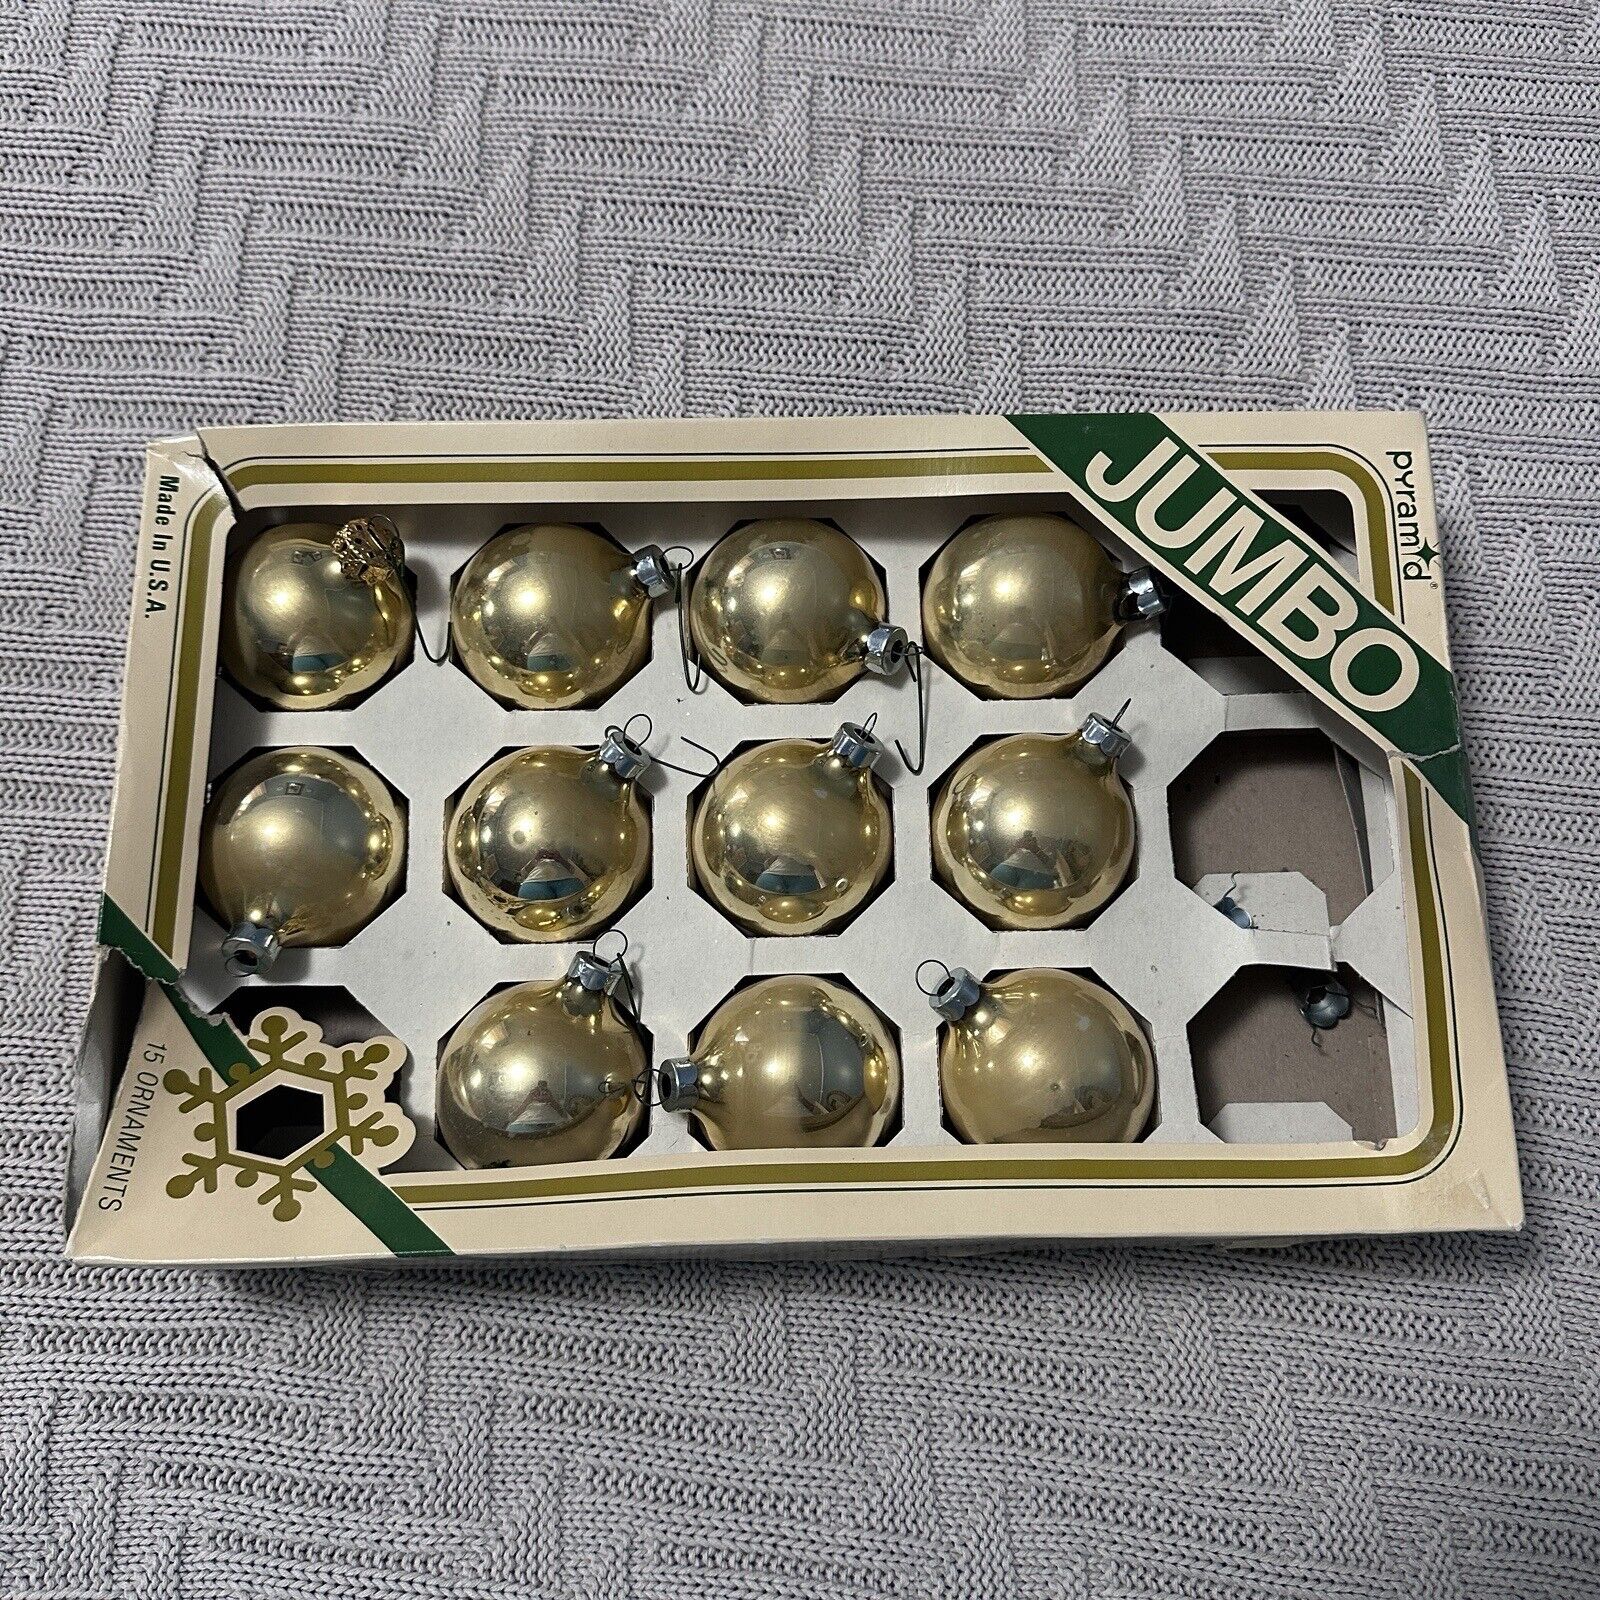 Vintage 1980s 11 Gold Ball Christmas Tree Ornaments In Box